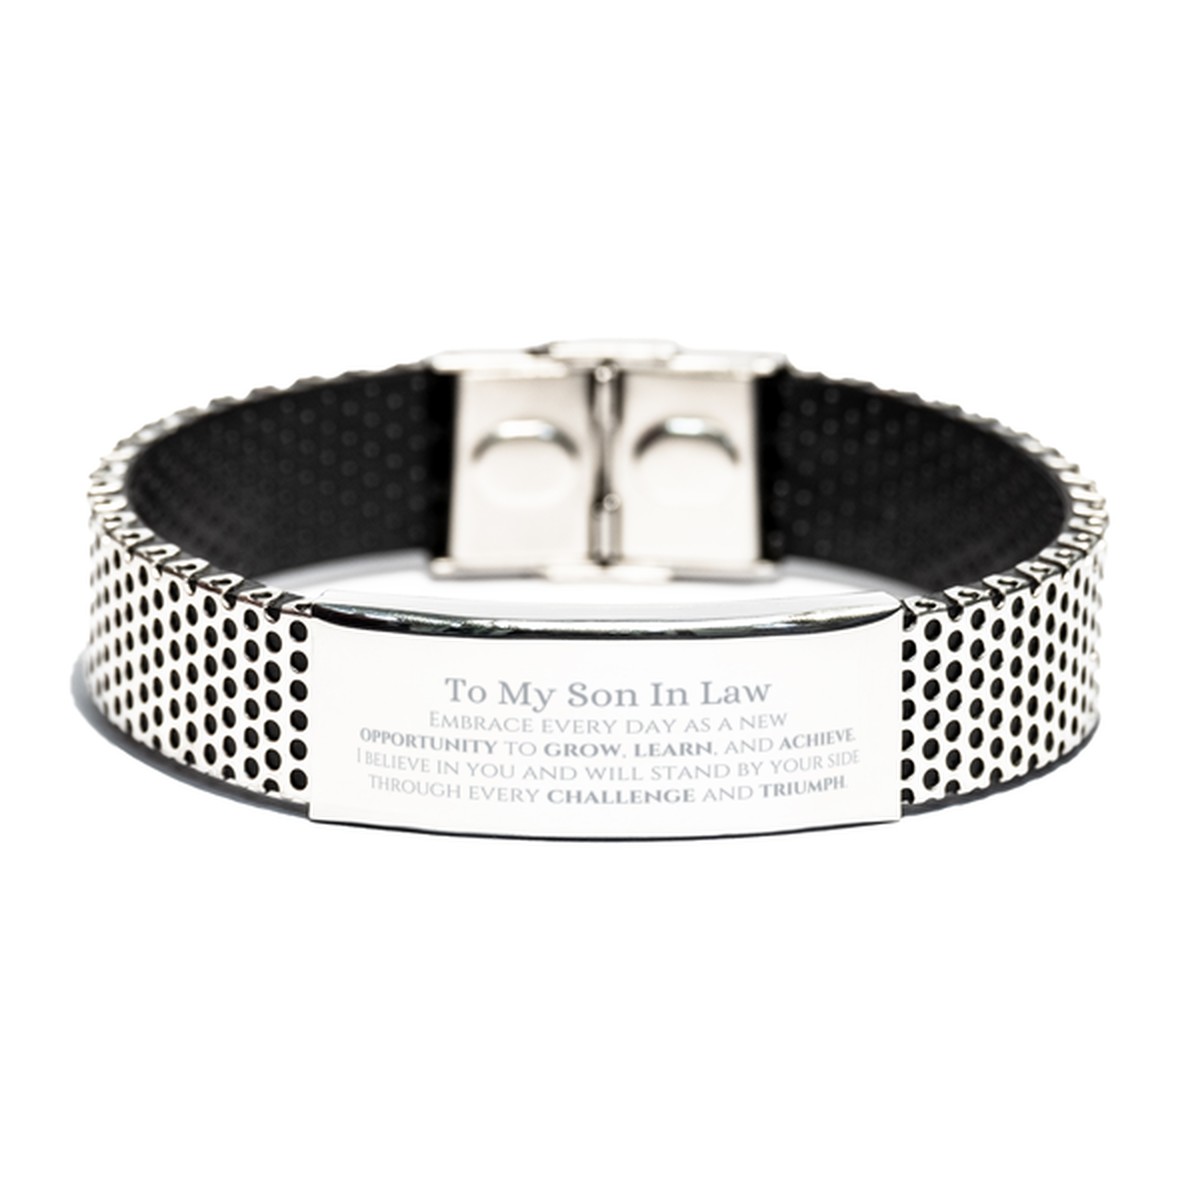 To My Son In Law Gifts, I believe in you and will stand by your side, Inspirational Stainless Steel Bracelet For Son In Law, Birthday Christmas Motivational Son In Law Gifts